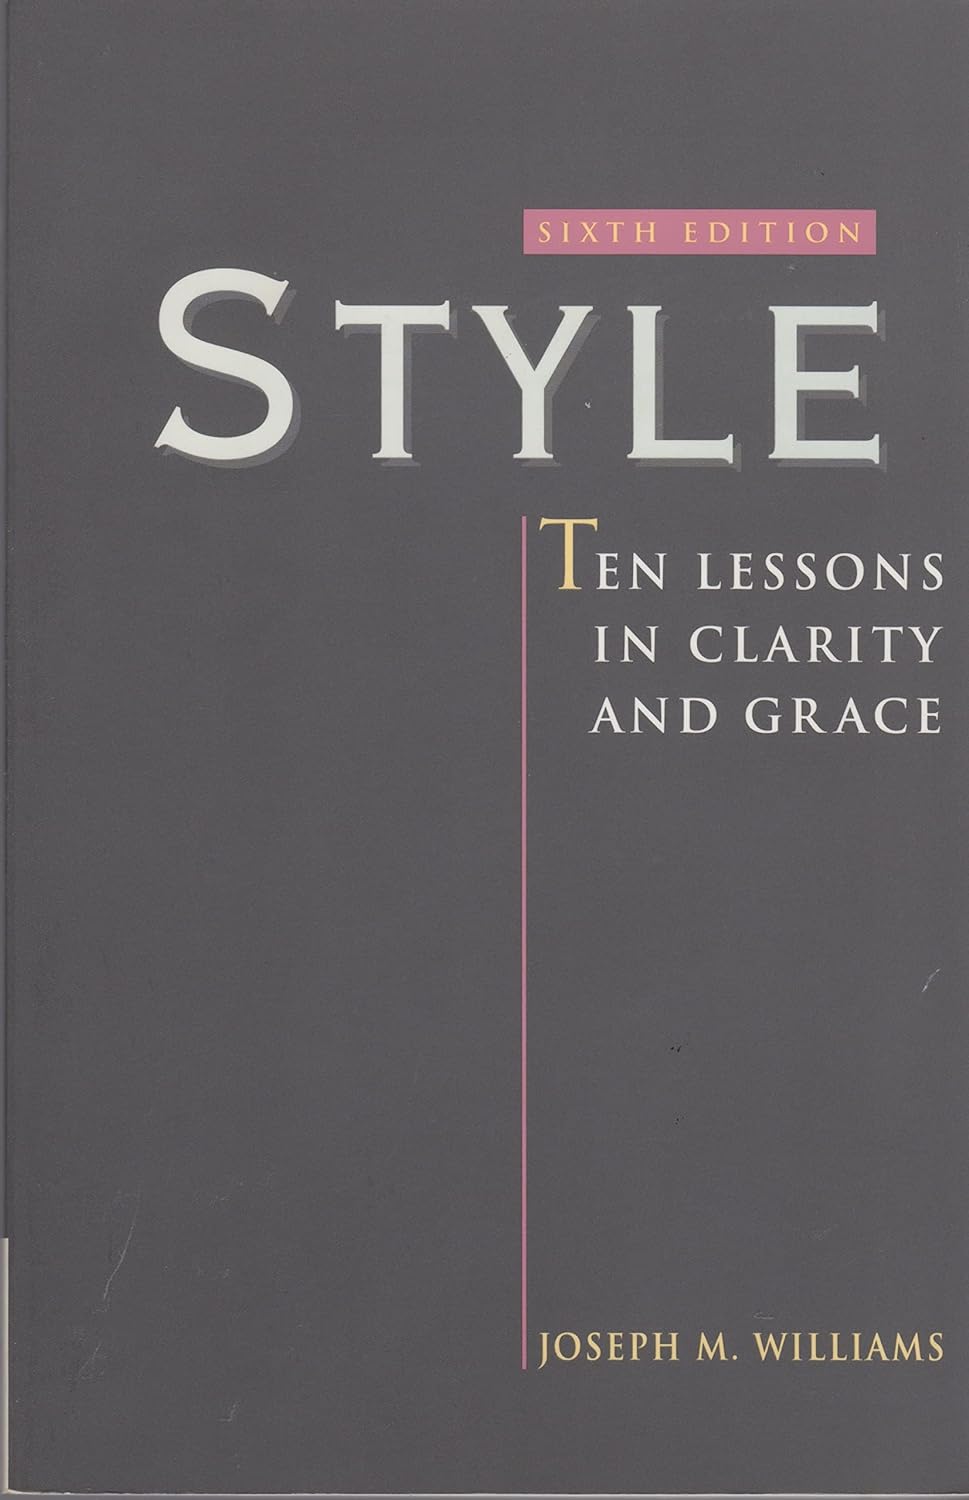 Style: 10 Lessons in Clarity and Grace - 6th Edition